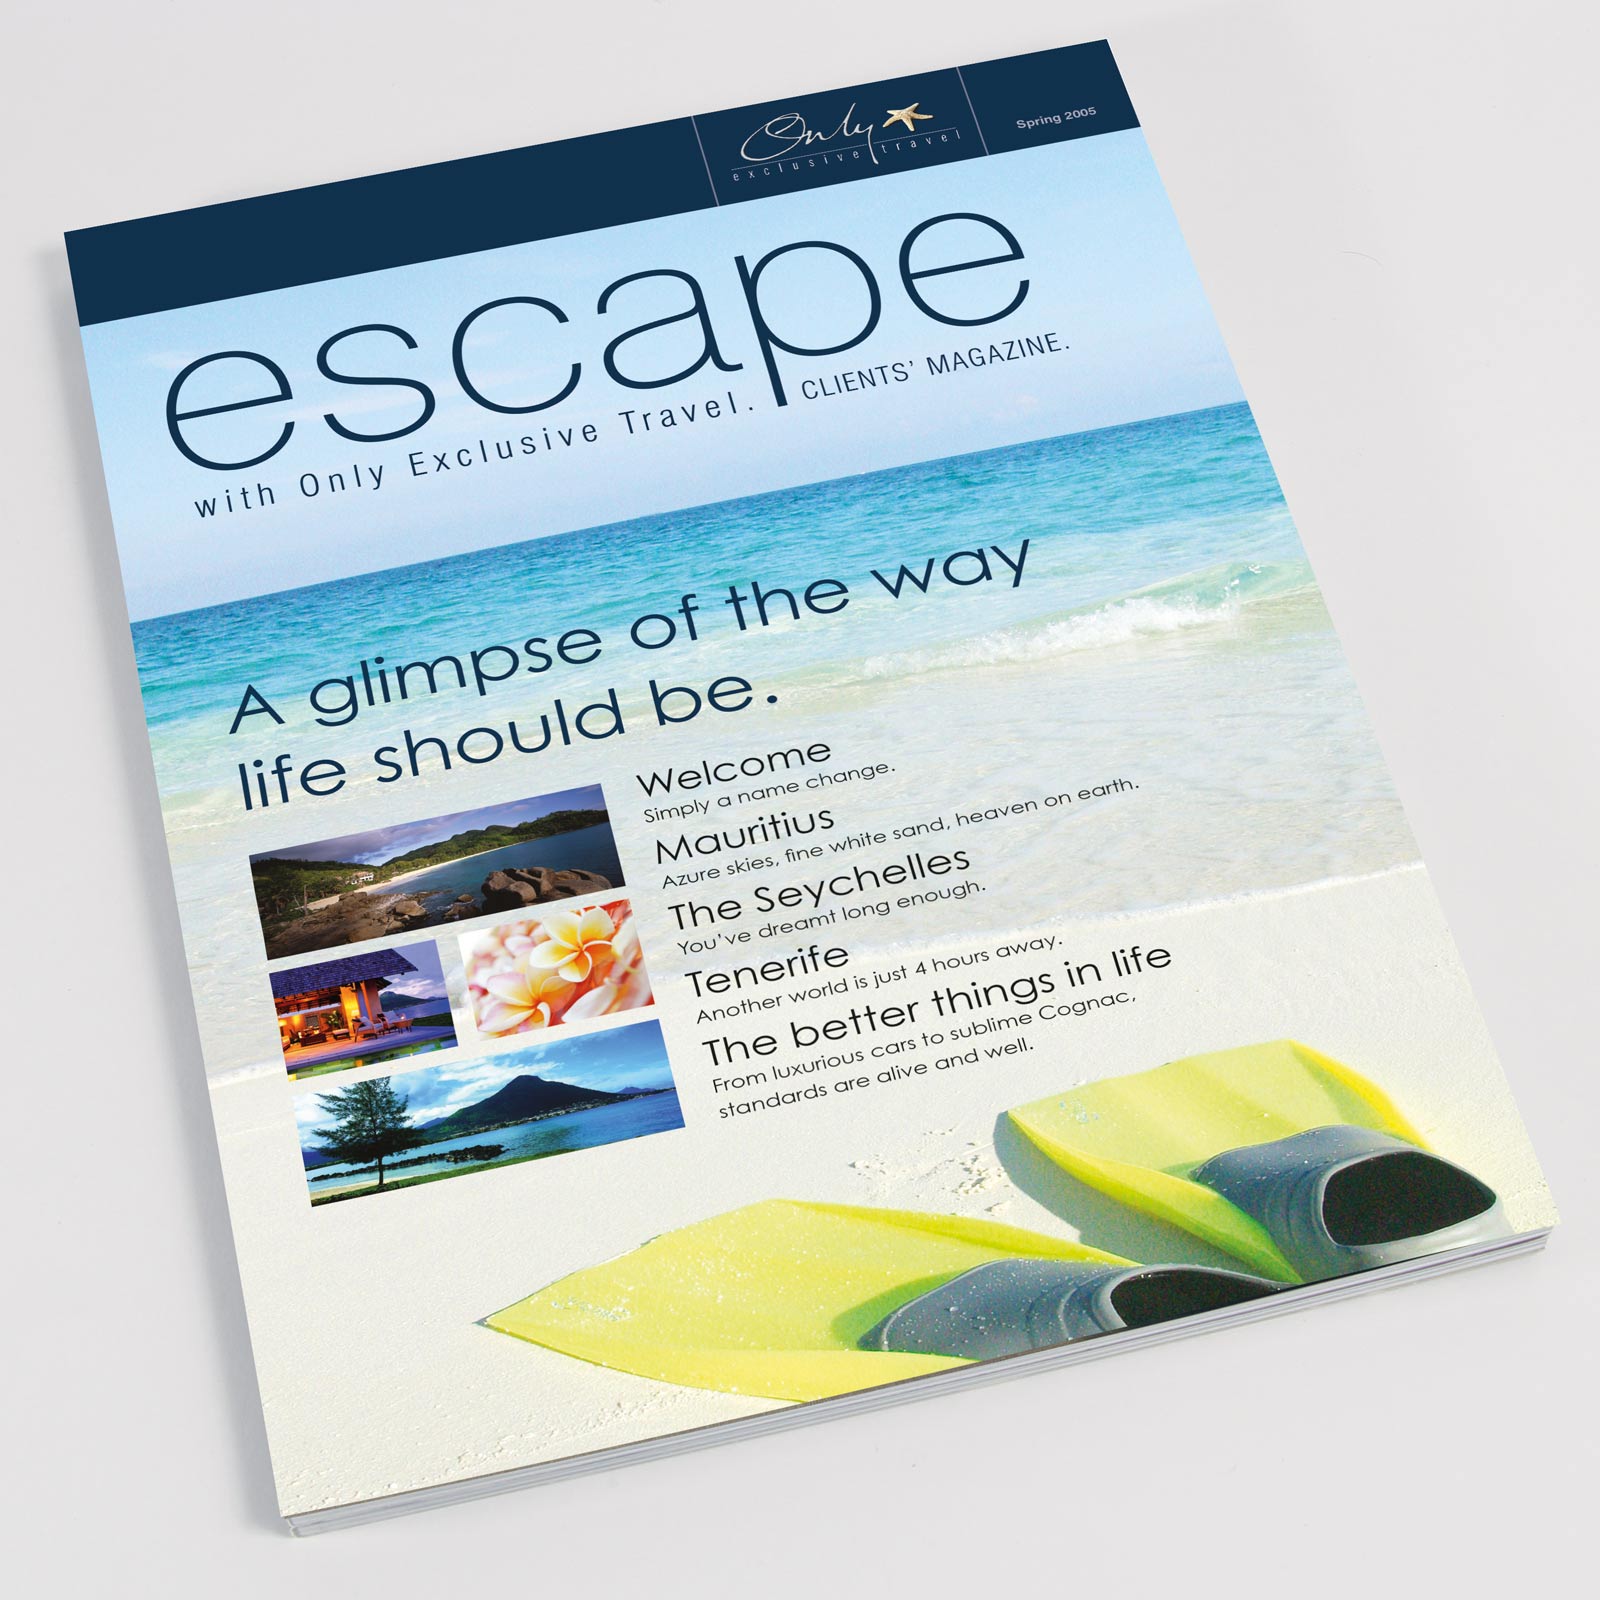 Only Exclusive Travel Corporate Magazine